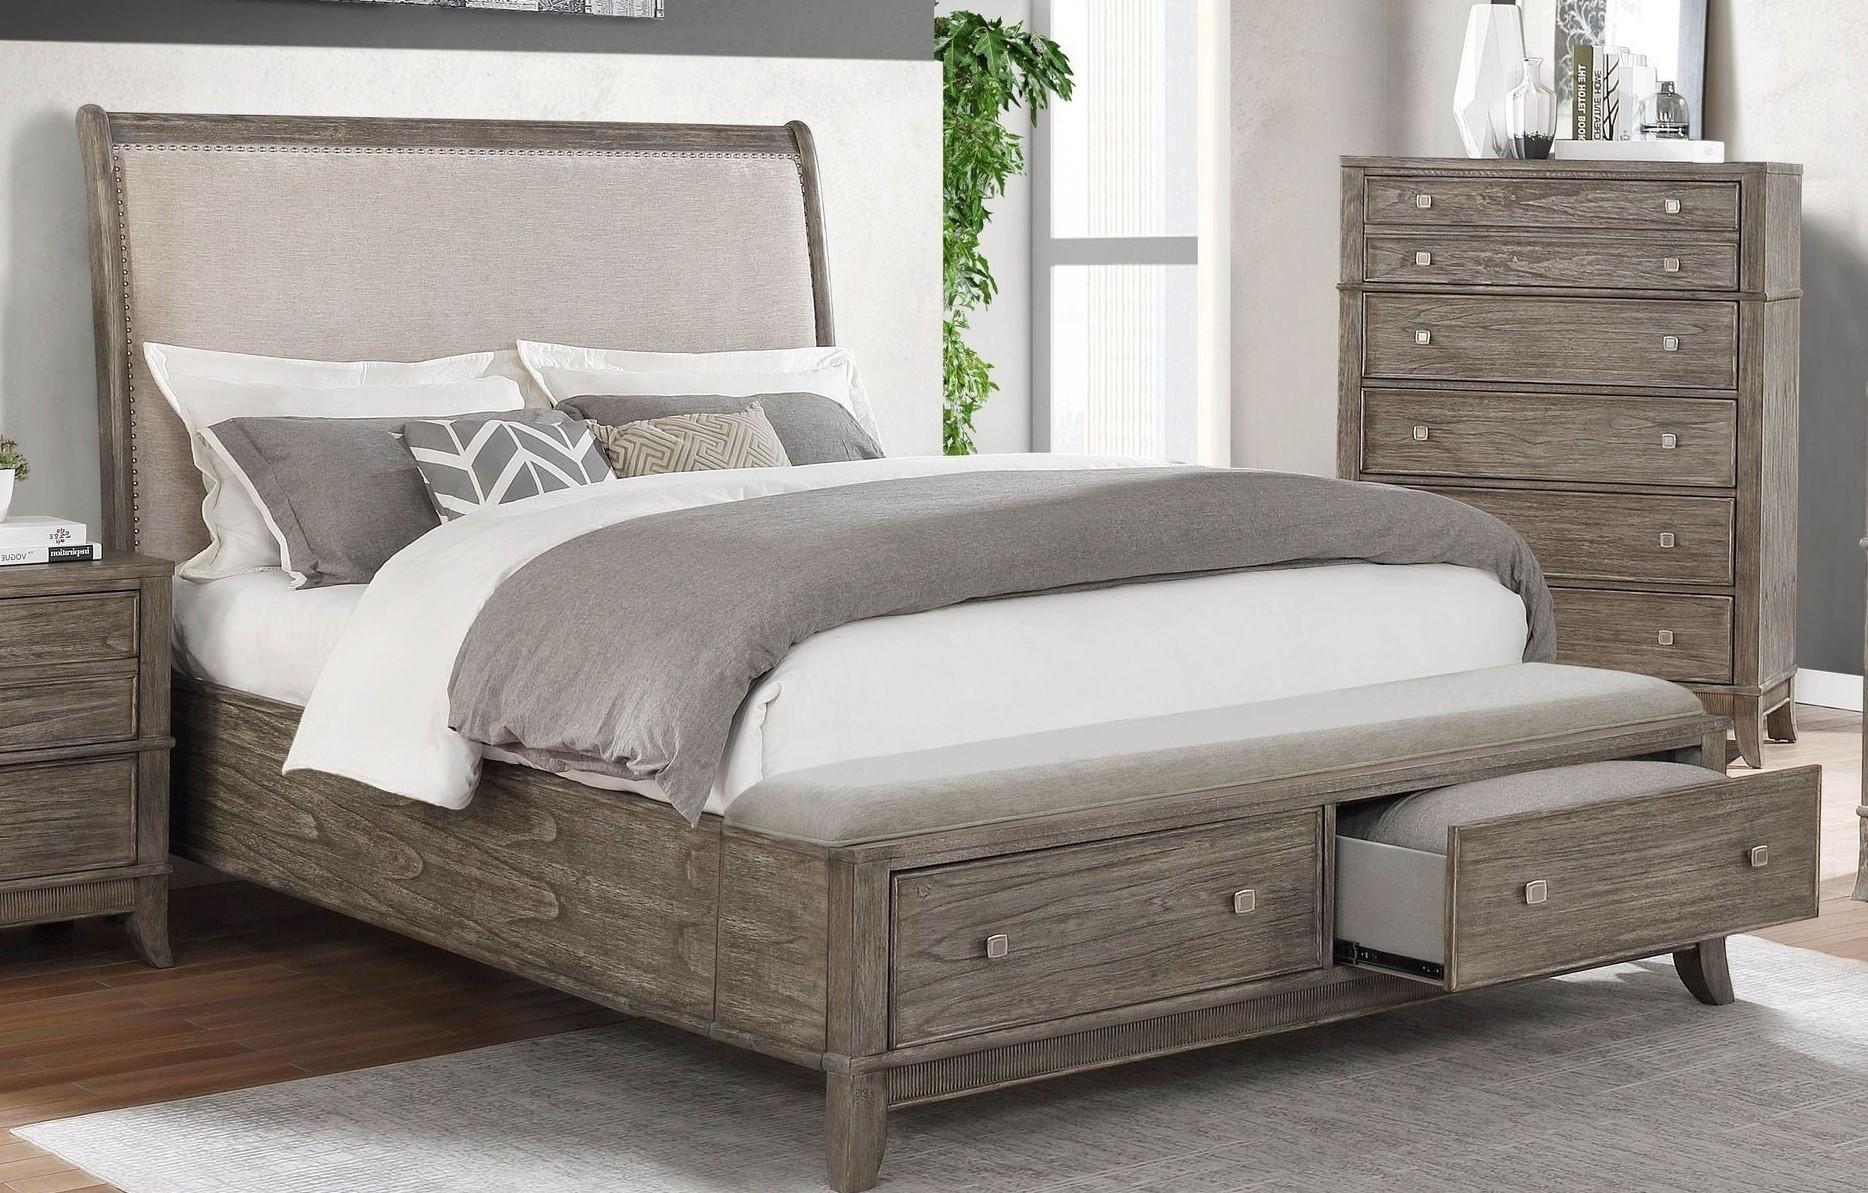 Landon Brushed Brown Upholstered Storage Sleigh Bed with Bench Footboard - Queen,Instore